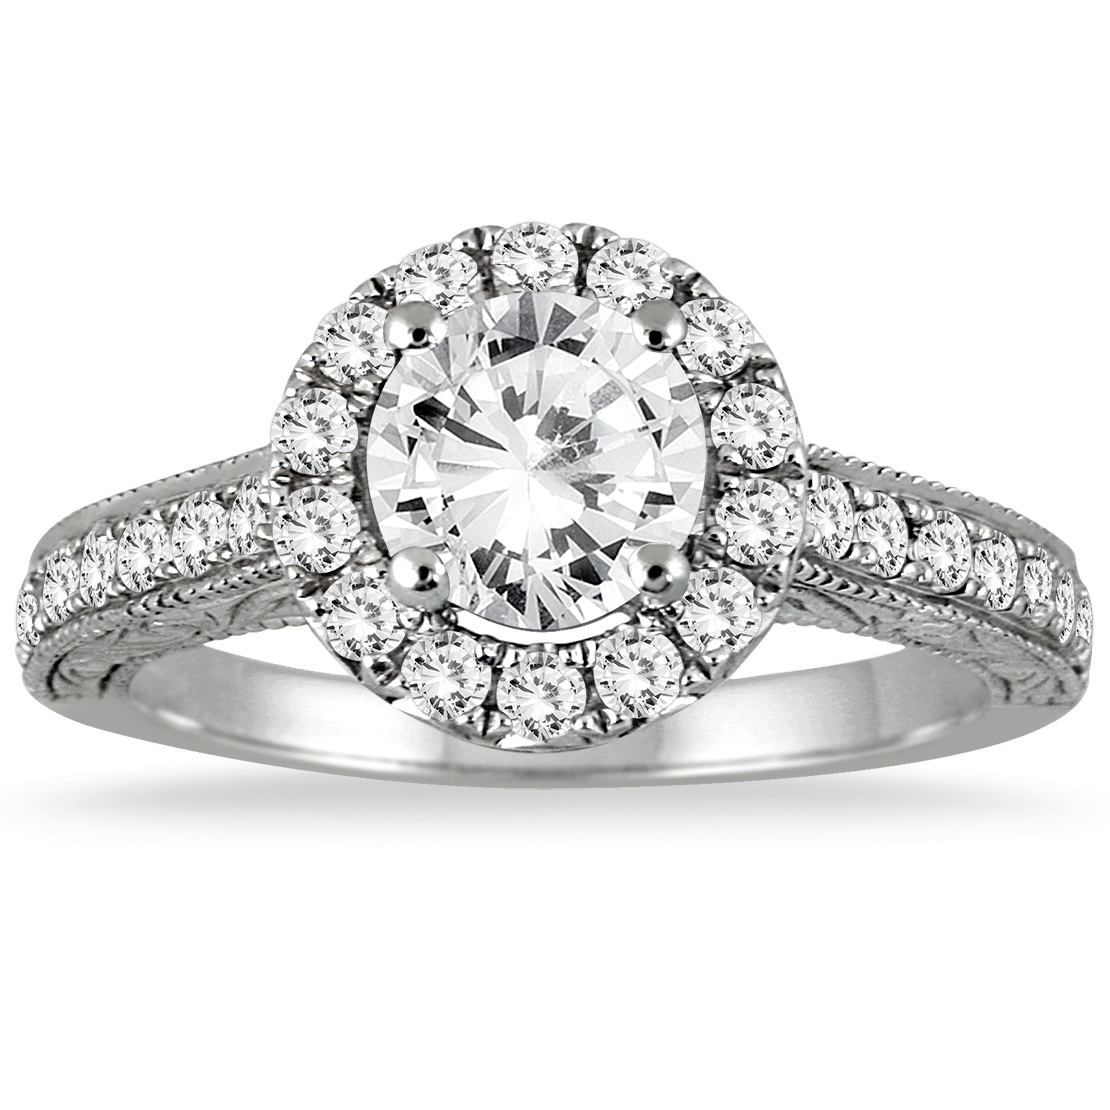 szul.com AGS Certified 1 1/2 Carat TW Halo Diamond Engagement Ring in 14K White Gold (I-J Color, I2-I3 Clarit